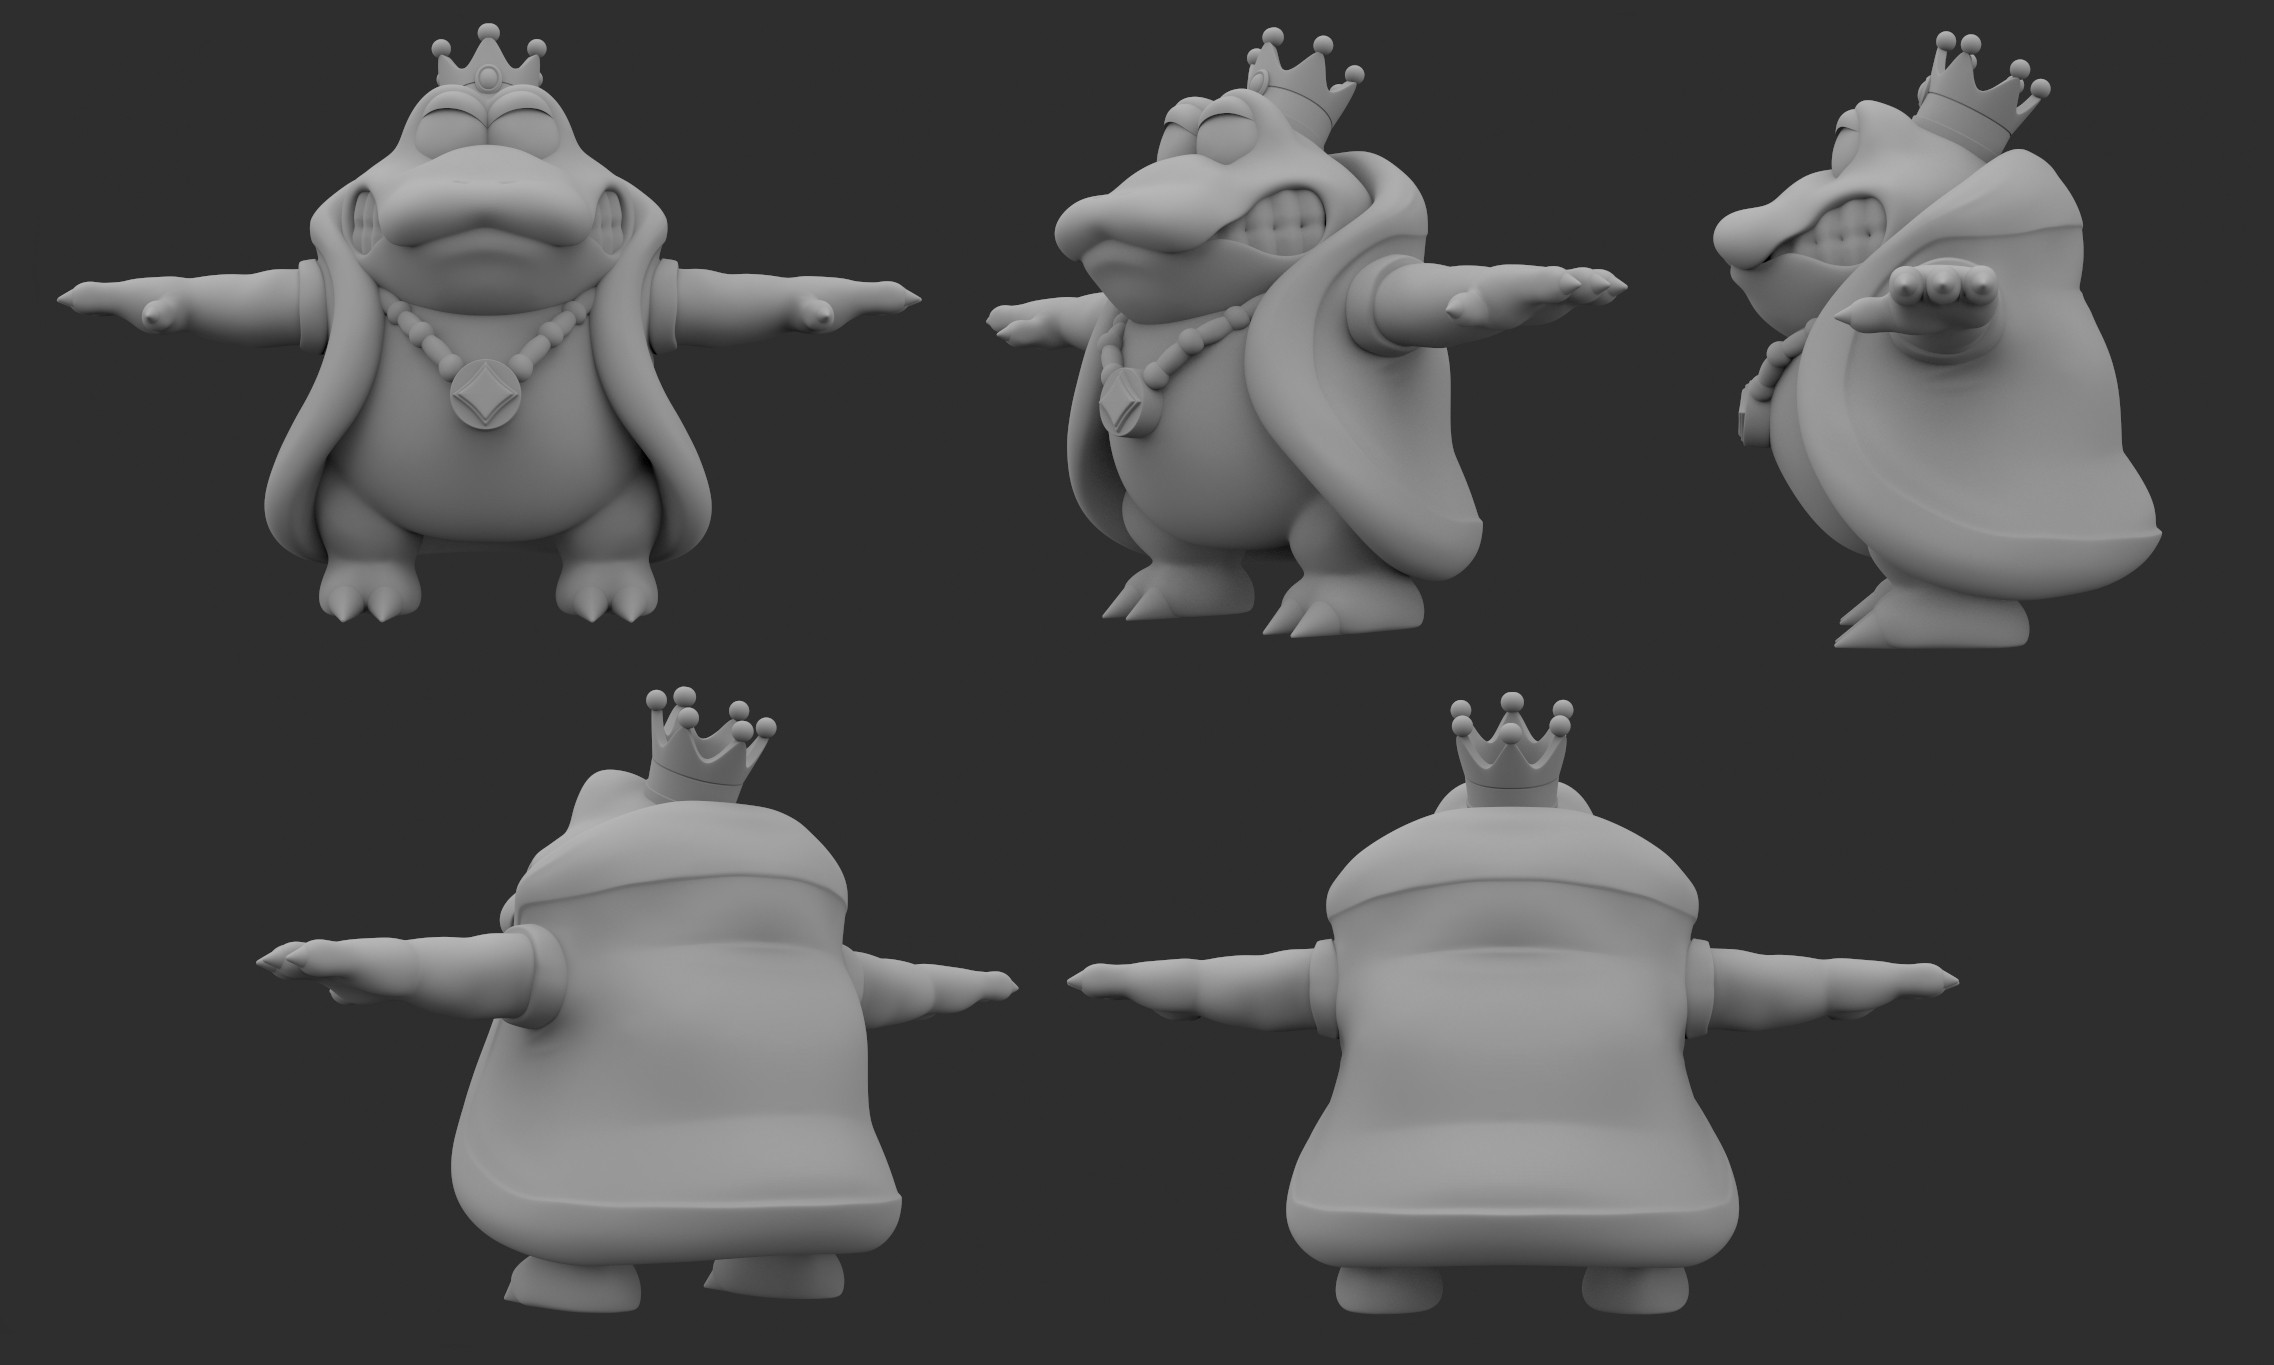 Different views of the initial sculpt